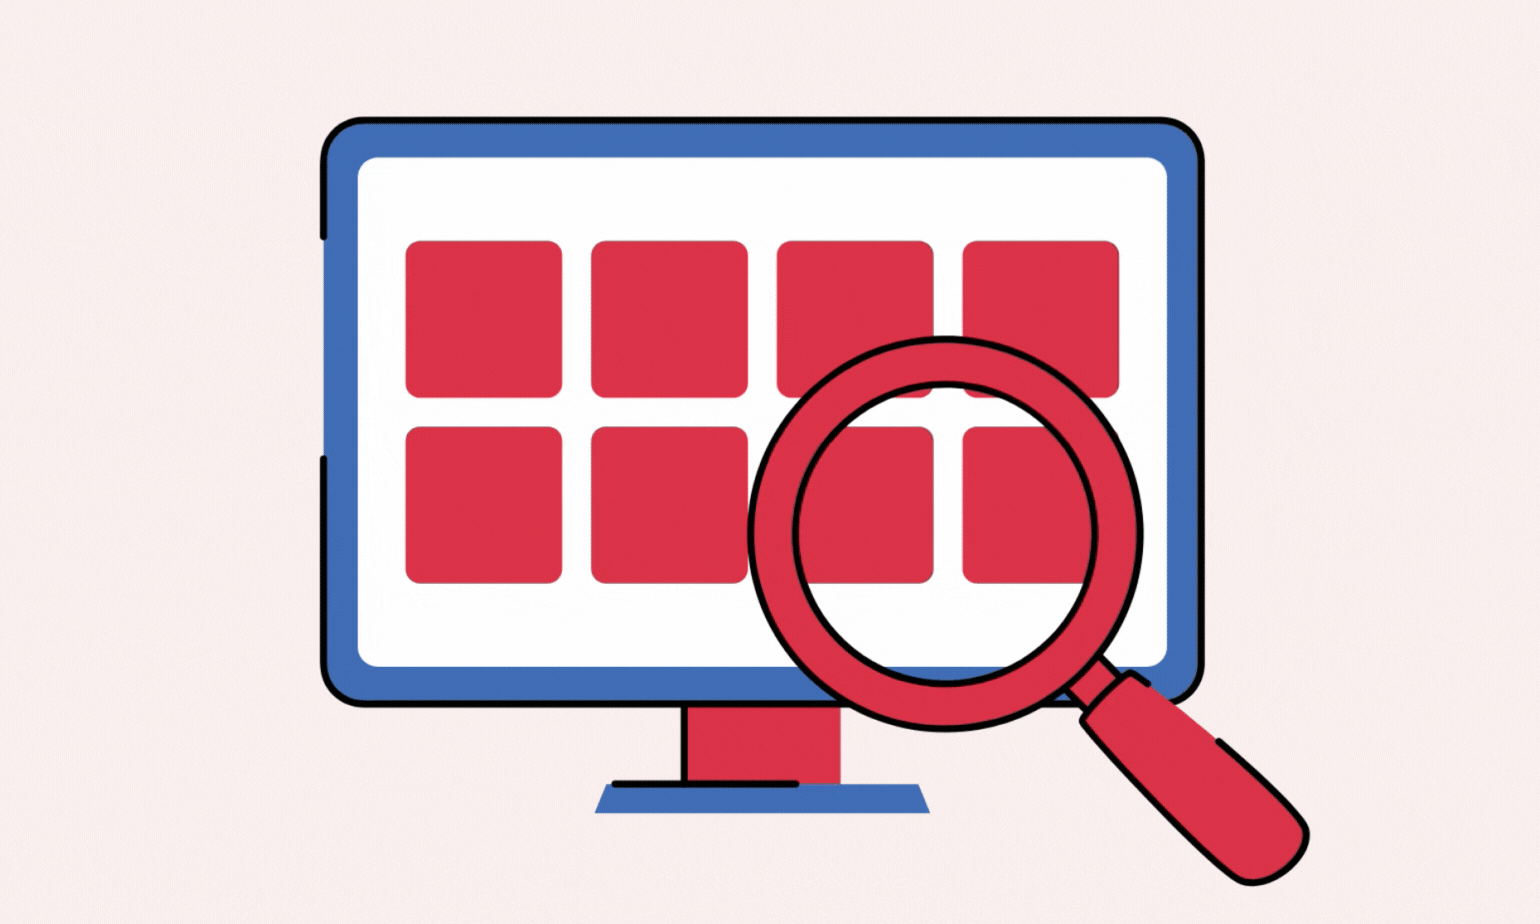 A magnifying glass moving around red squares on a computer monitor